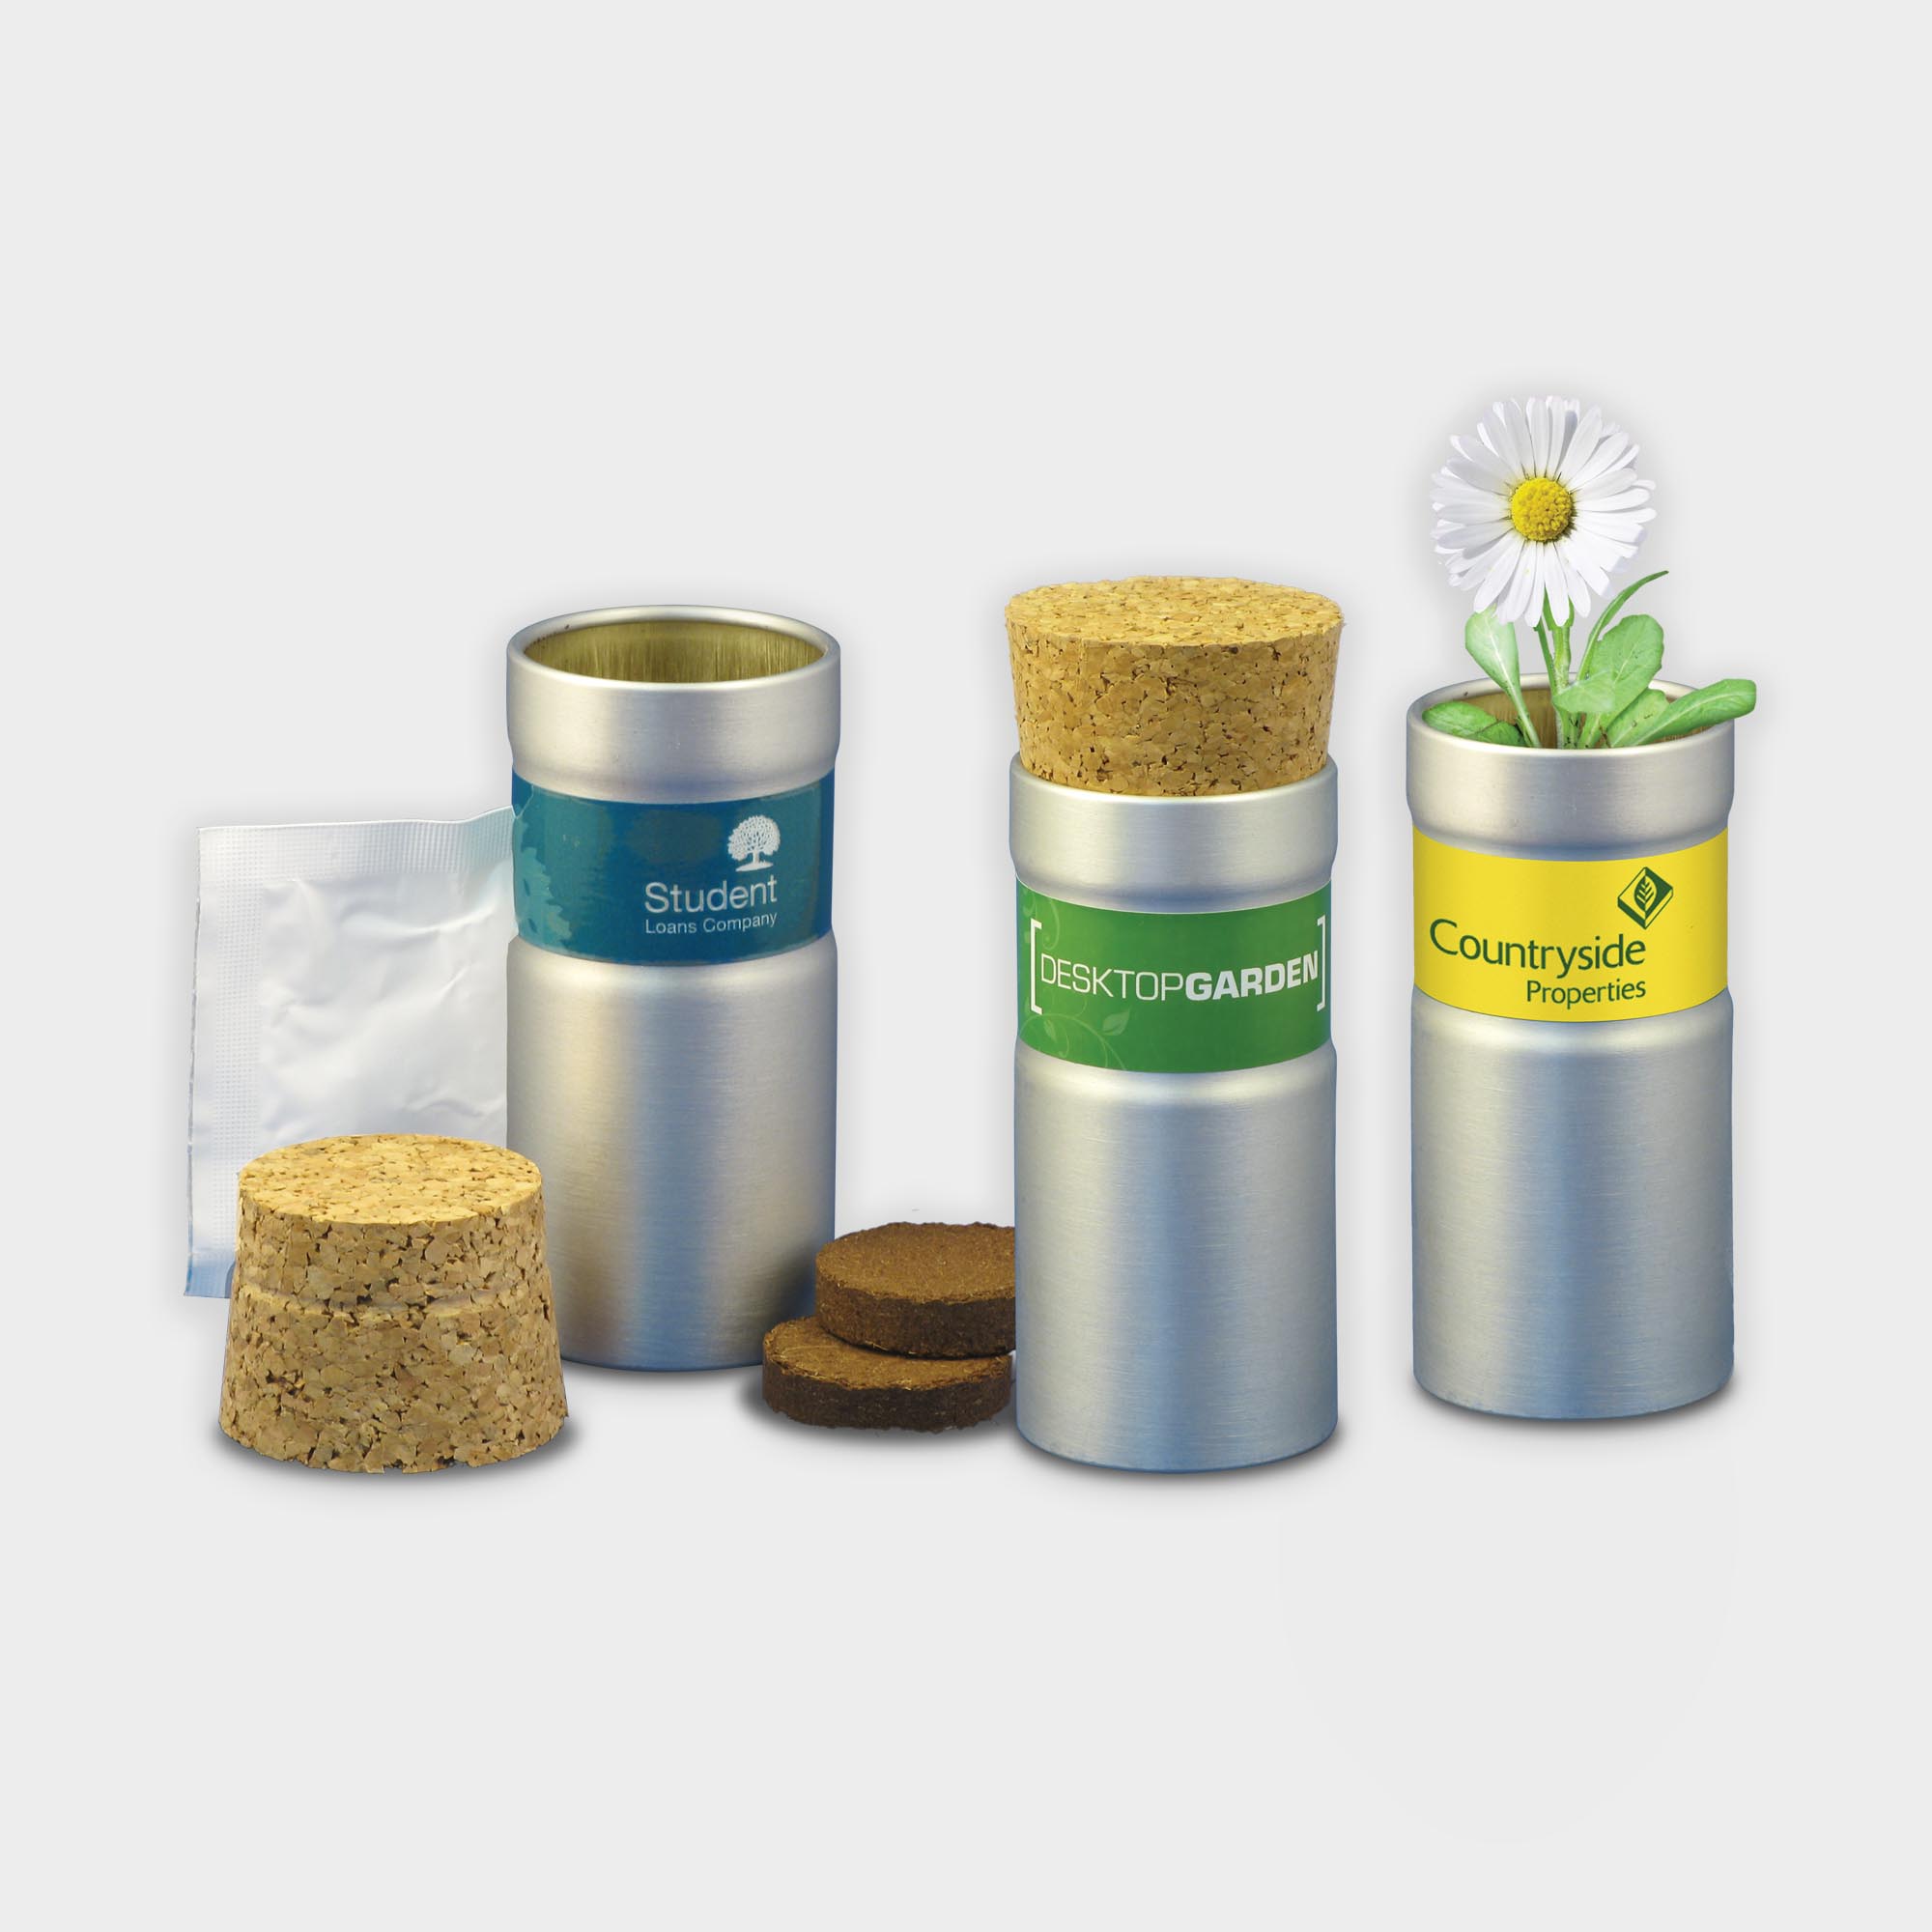 The Green & Good Desktop Garden Tube comes with a soil tablet & seed balls. It is made from part-recycled aluminium with a cork stopper and can be personalised with a digital sticker. Available in silver brushed or matt black finish.